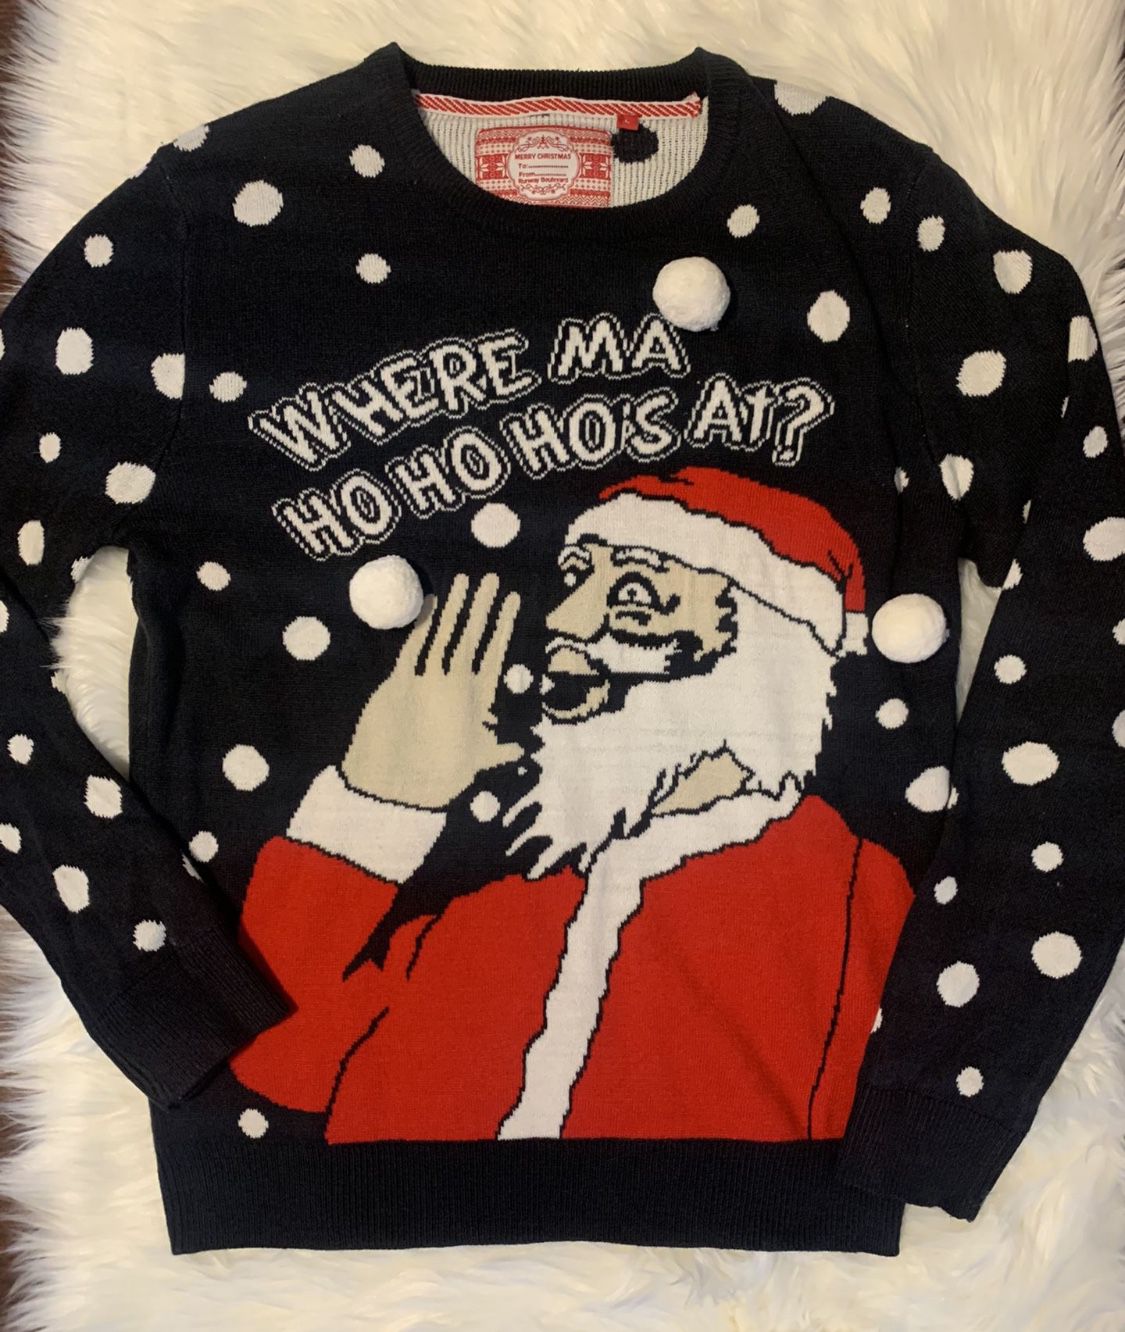 Mens Large Ugly Christmas Sweater (Check Out All My Other Christmas Items For Sale!)